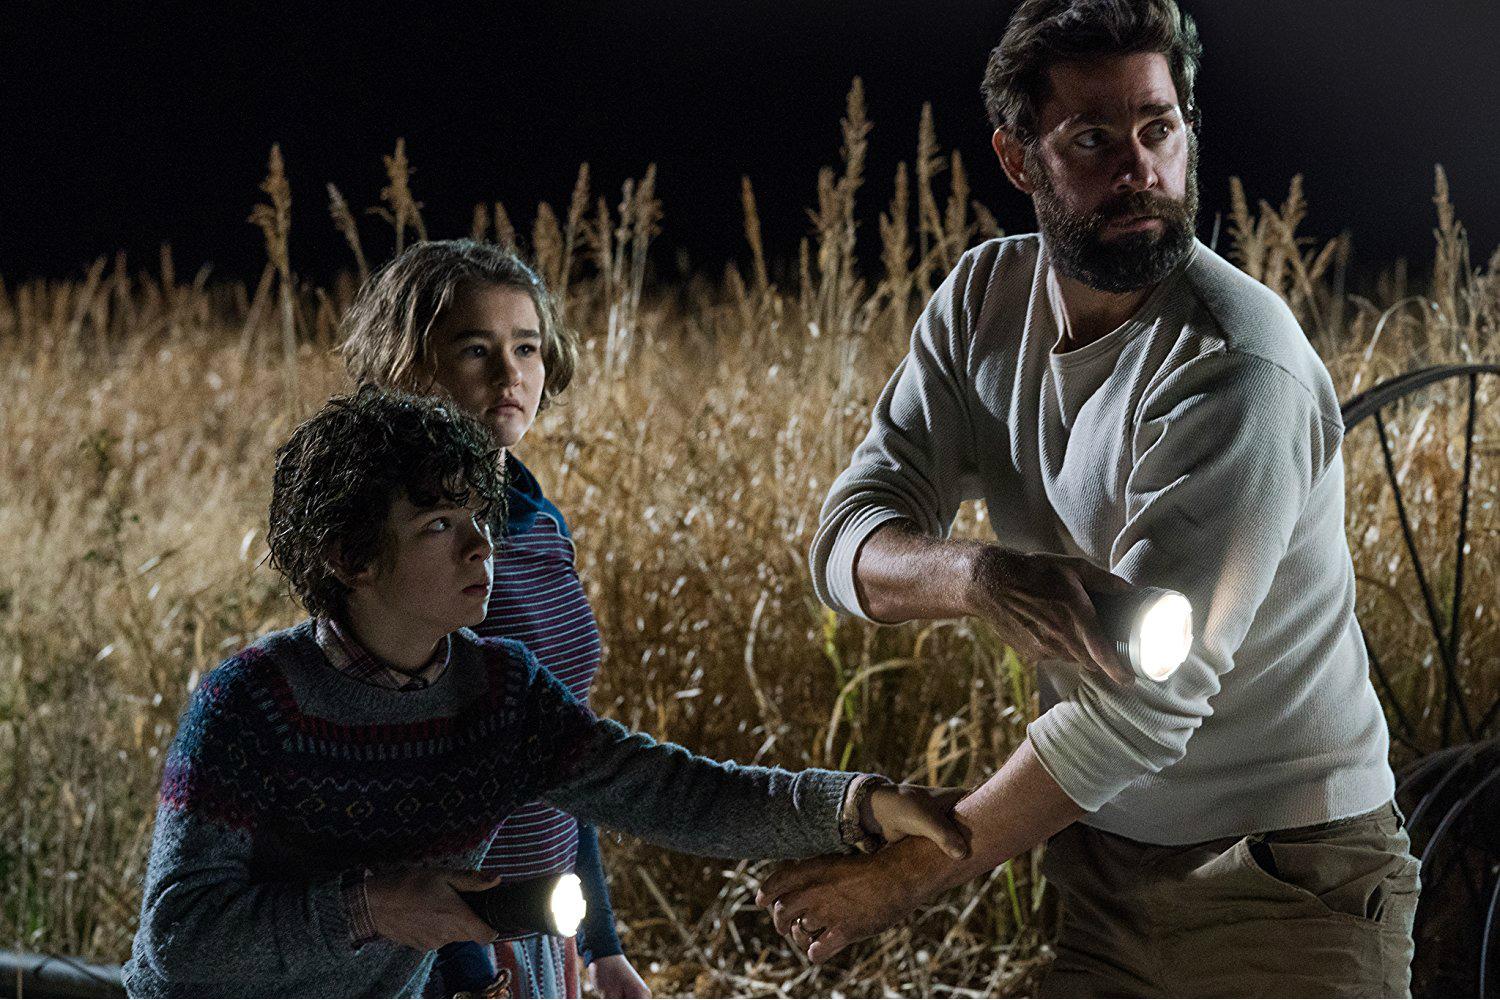 Krasinski with co-stars Noah Jupe and Millicent Simmonds in ‘A Quiet Place’